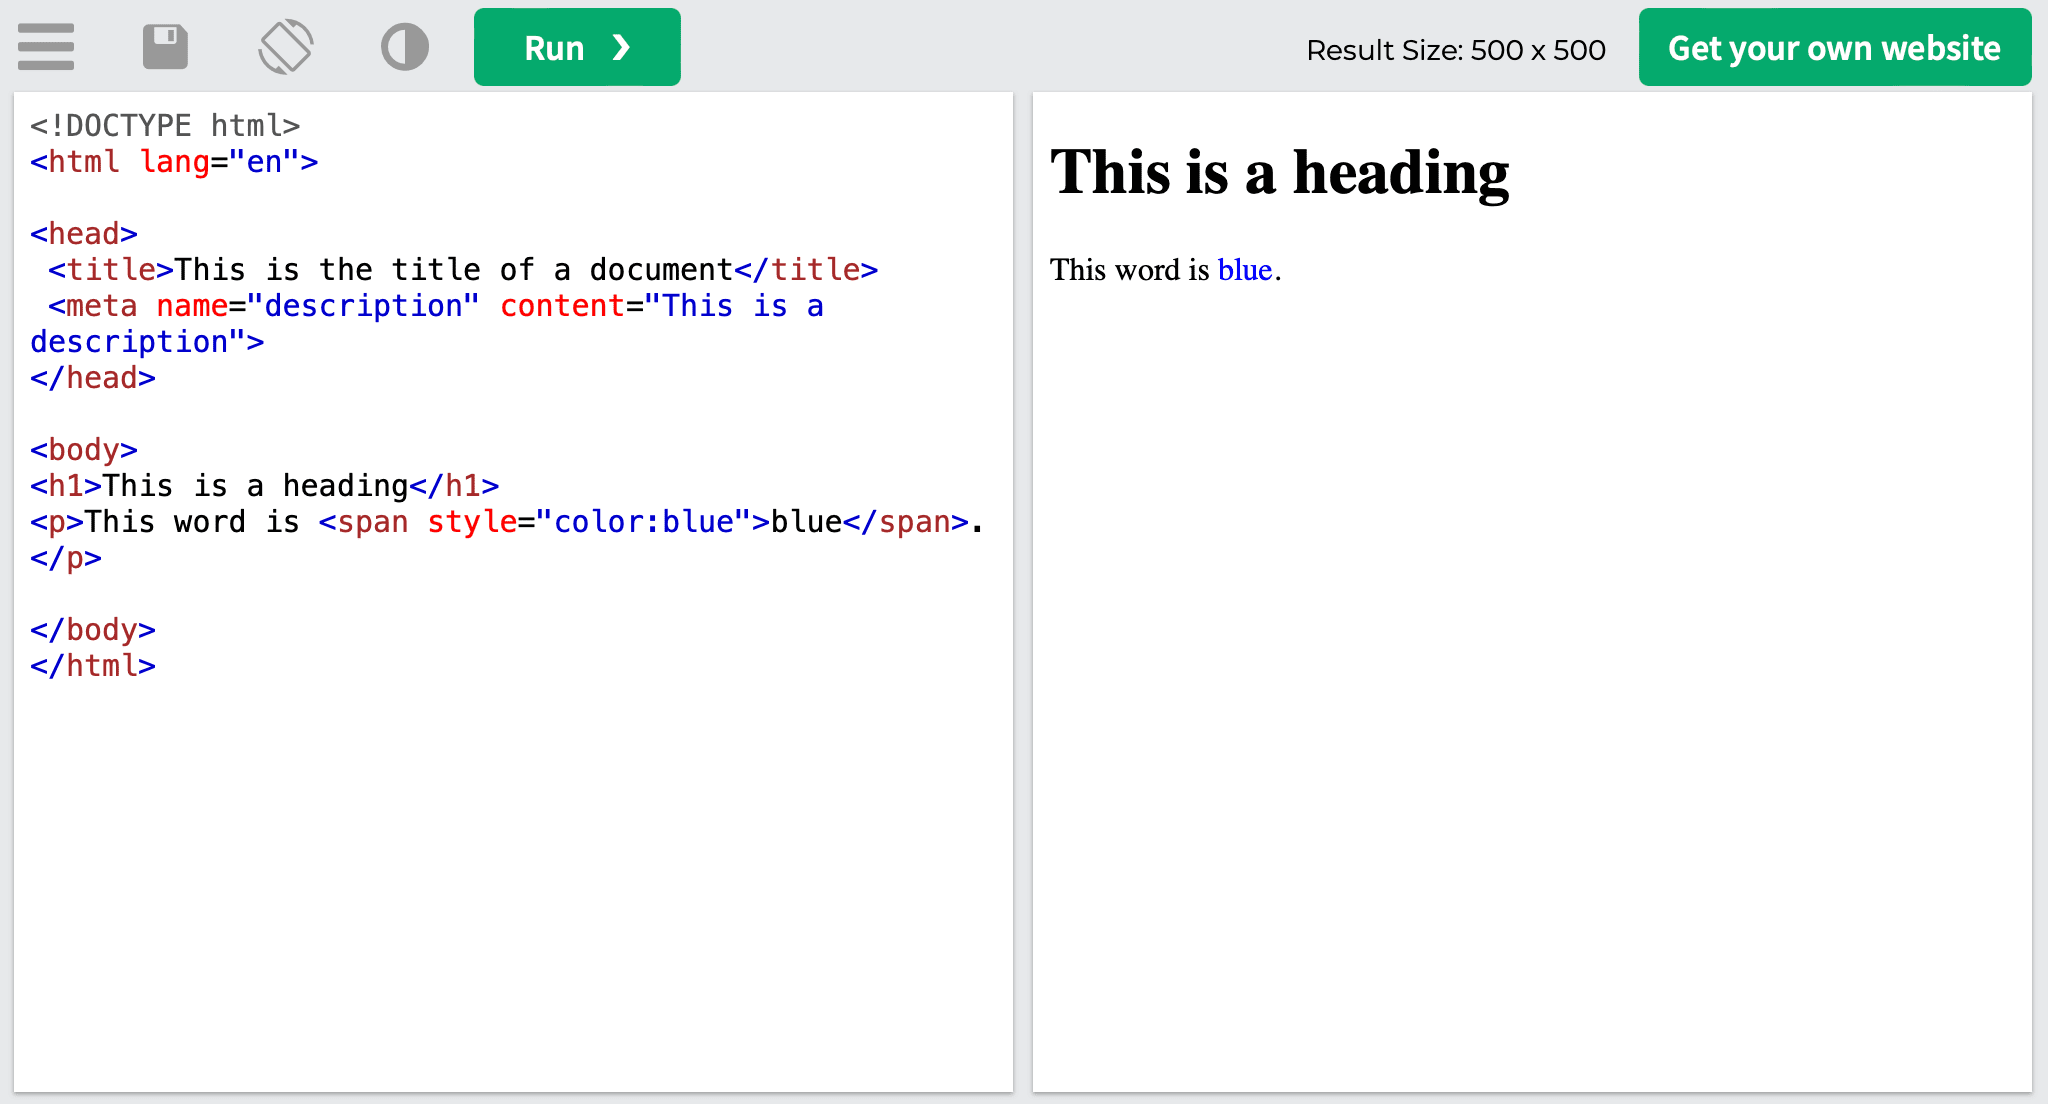 The <span> tag example